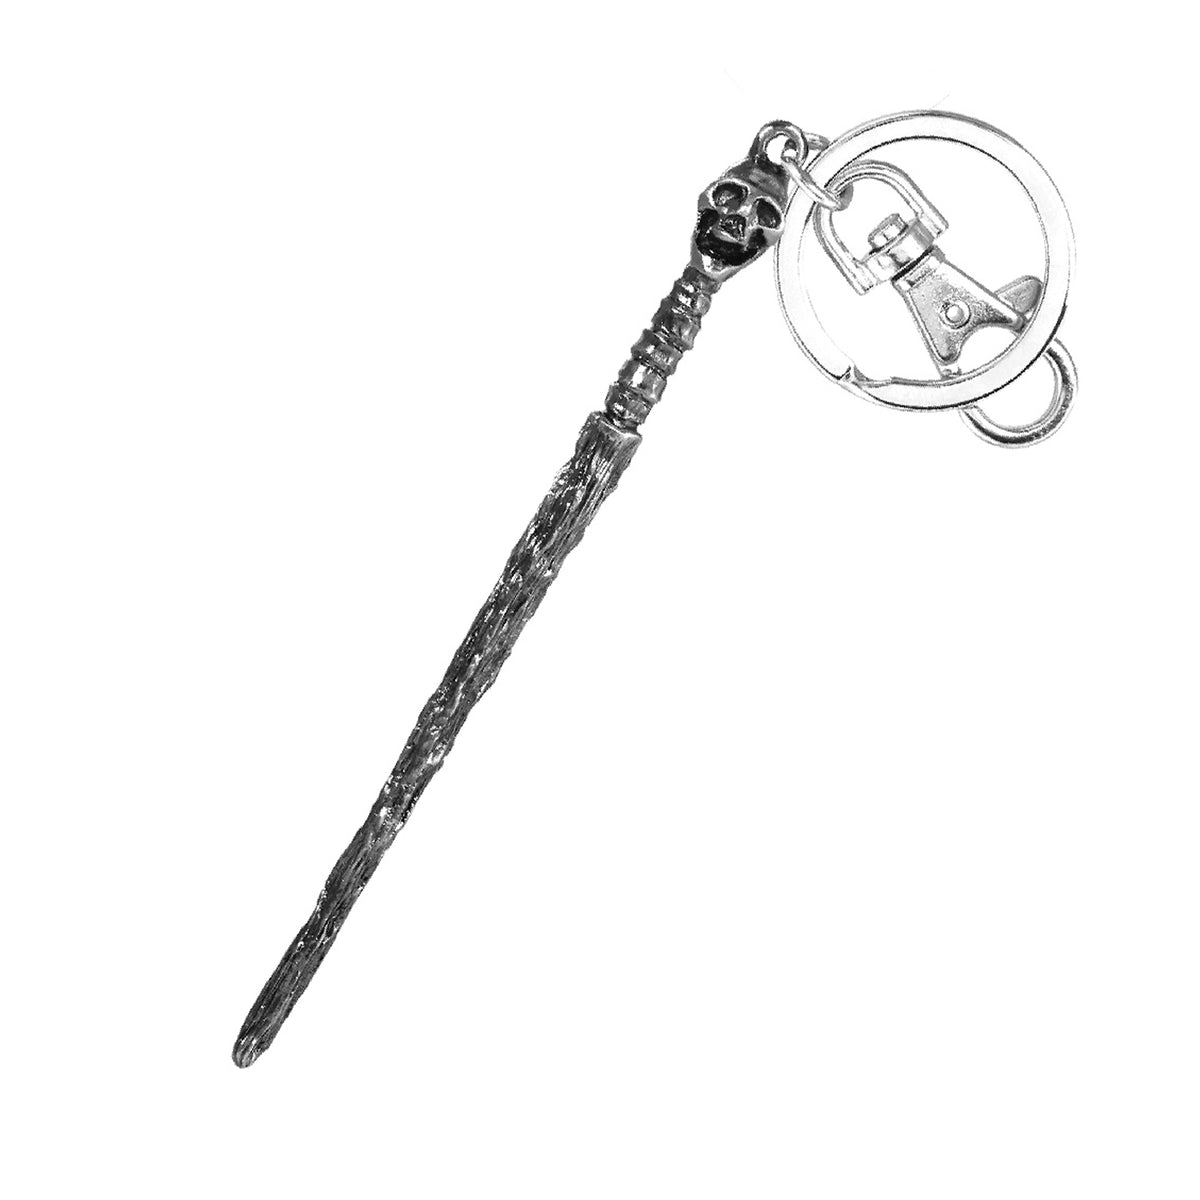 Harry Potter Death Eater Wand Keychain